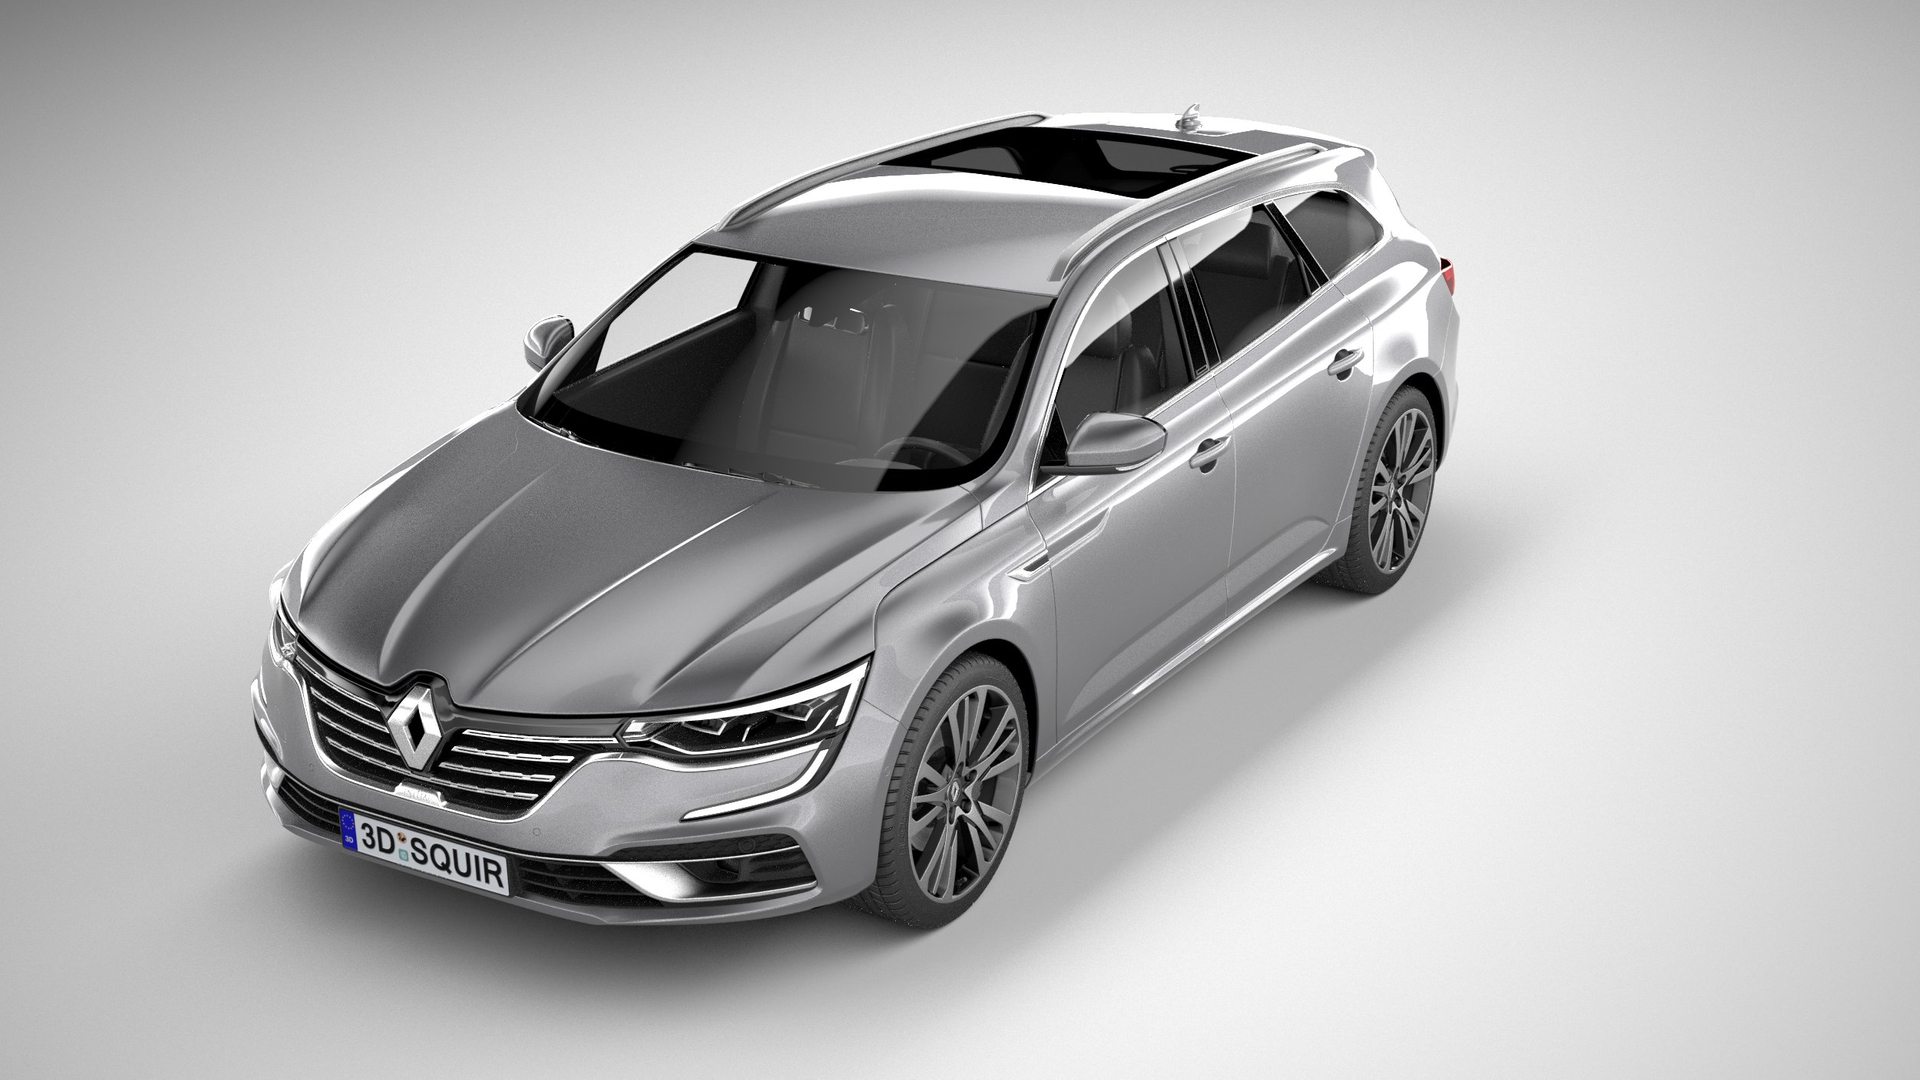 This is the Renault Talisman Estate. And we're not getting it in